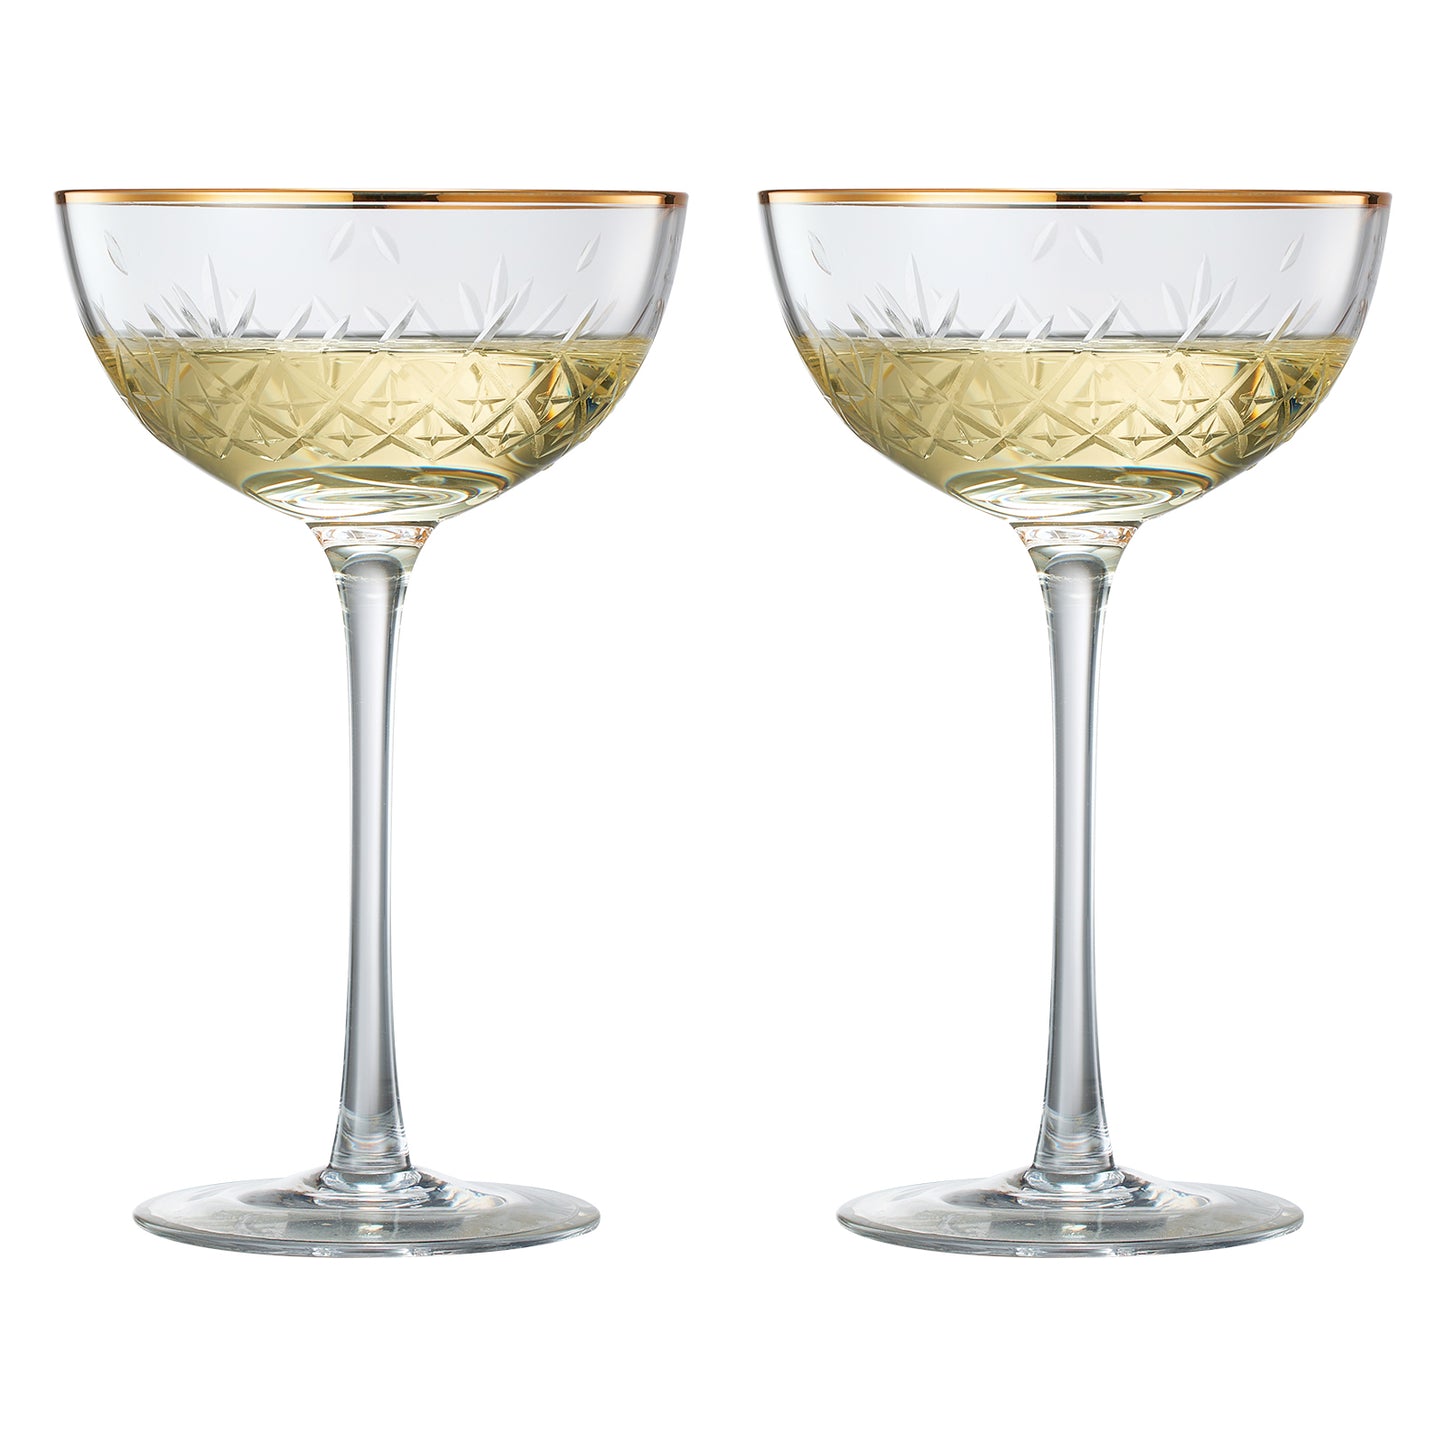 Basilica Coupe Cocktail Glassware, Set of 2